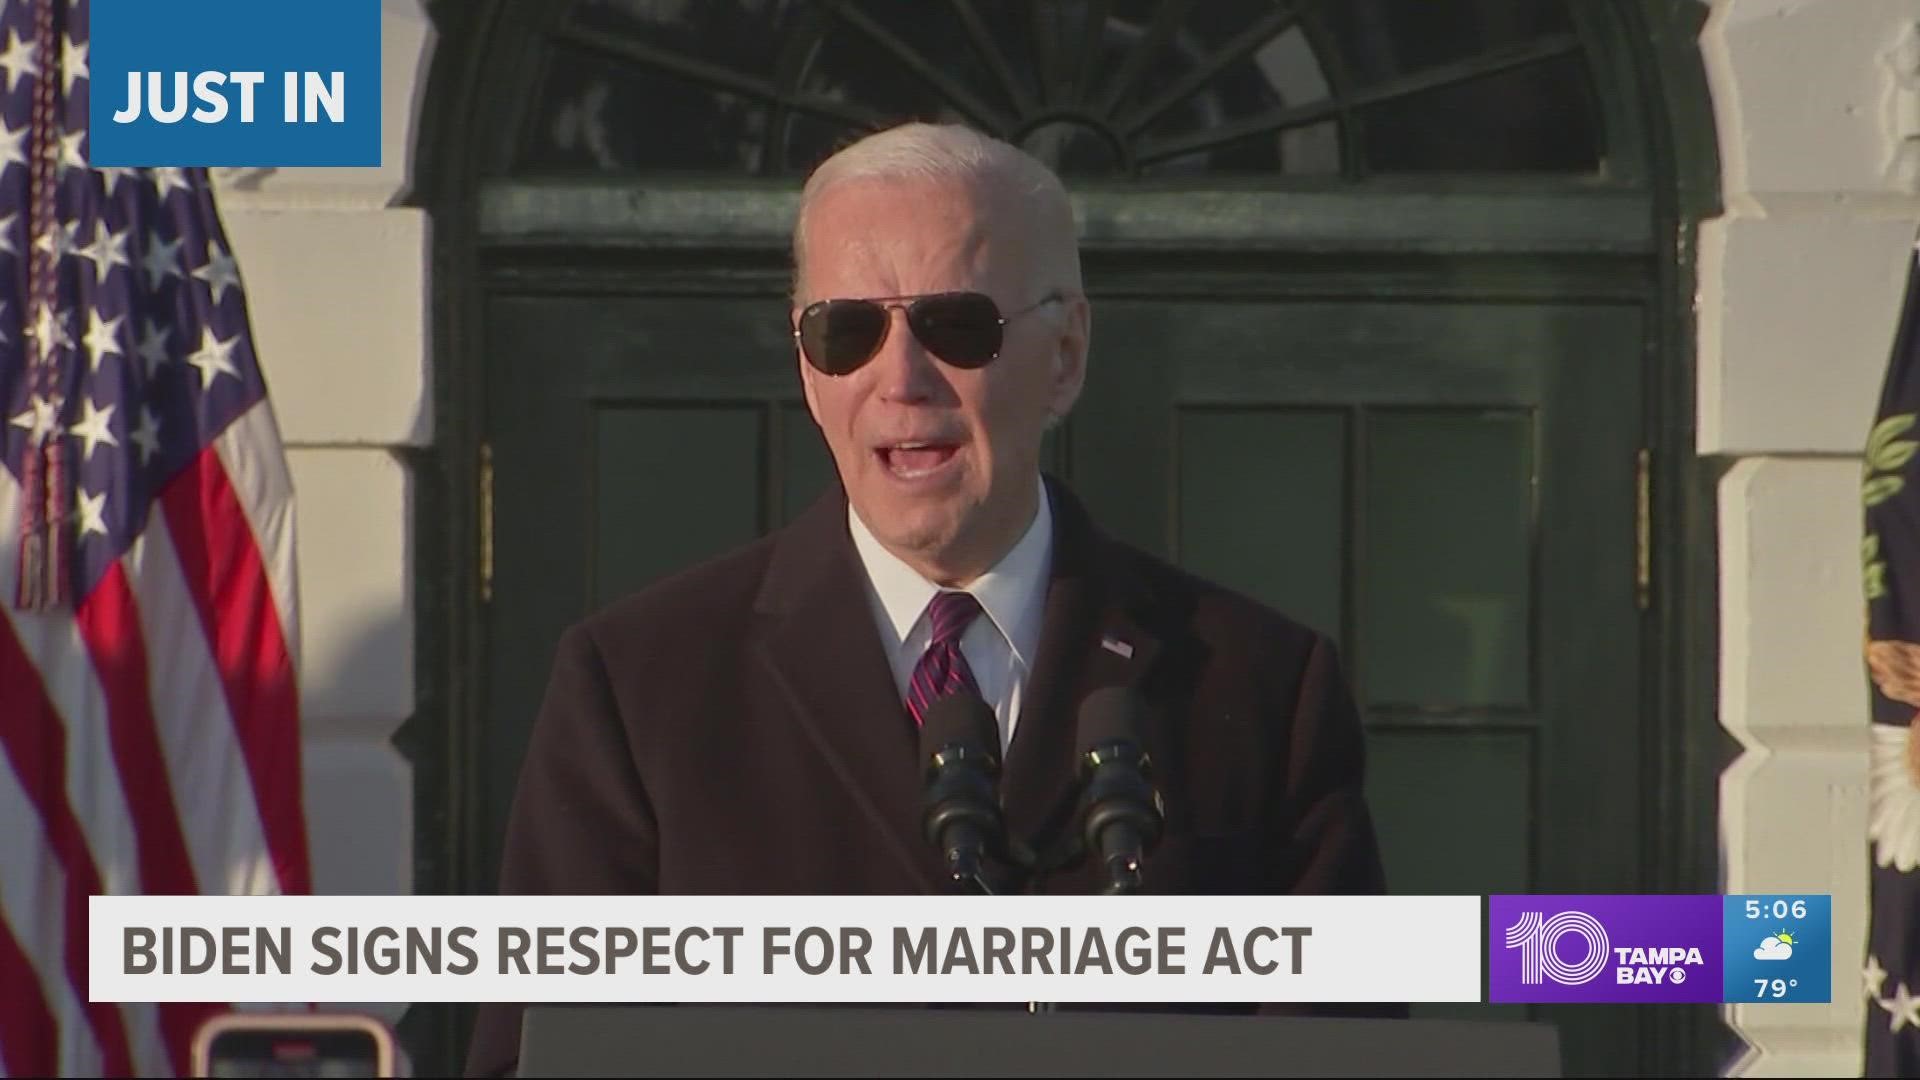 “This law and the love it defends strike a blow against hate in all its forms,” Biden said Tuesday on the South Lawn of the White House.